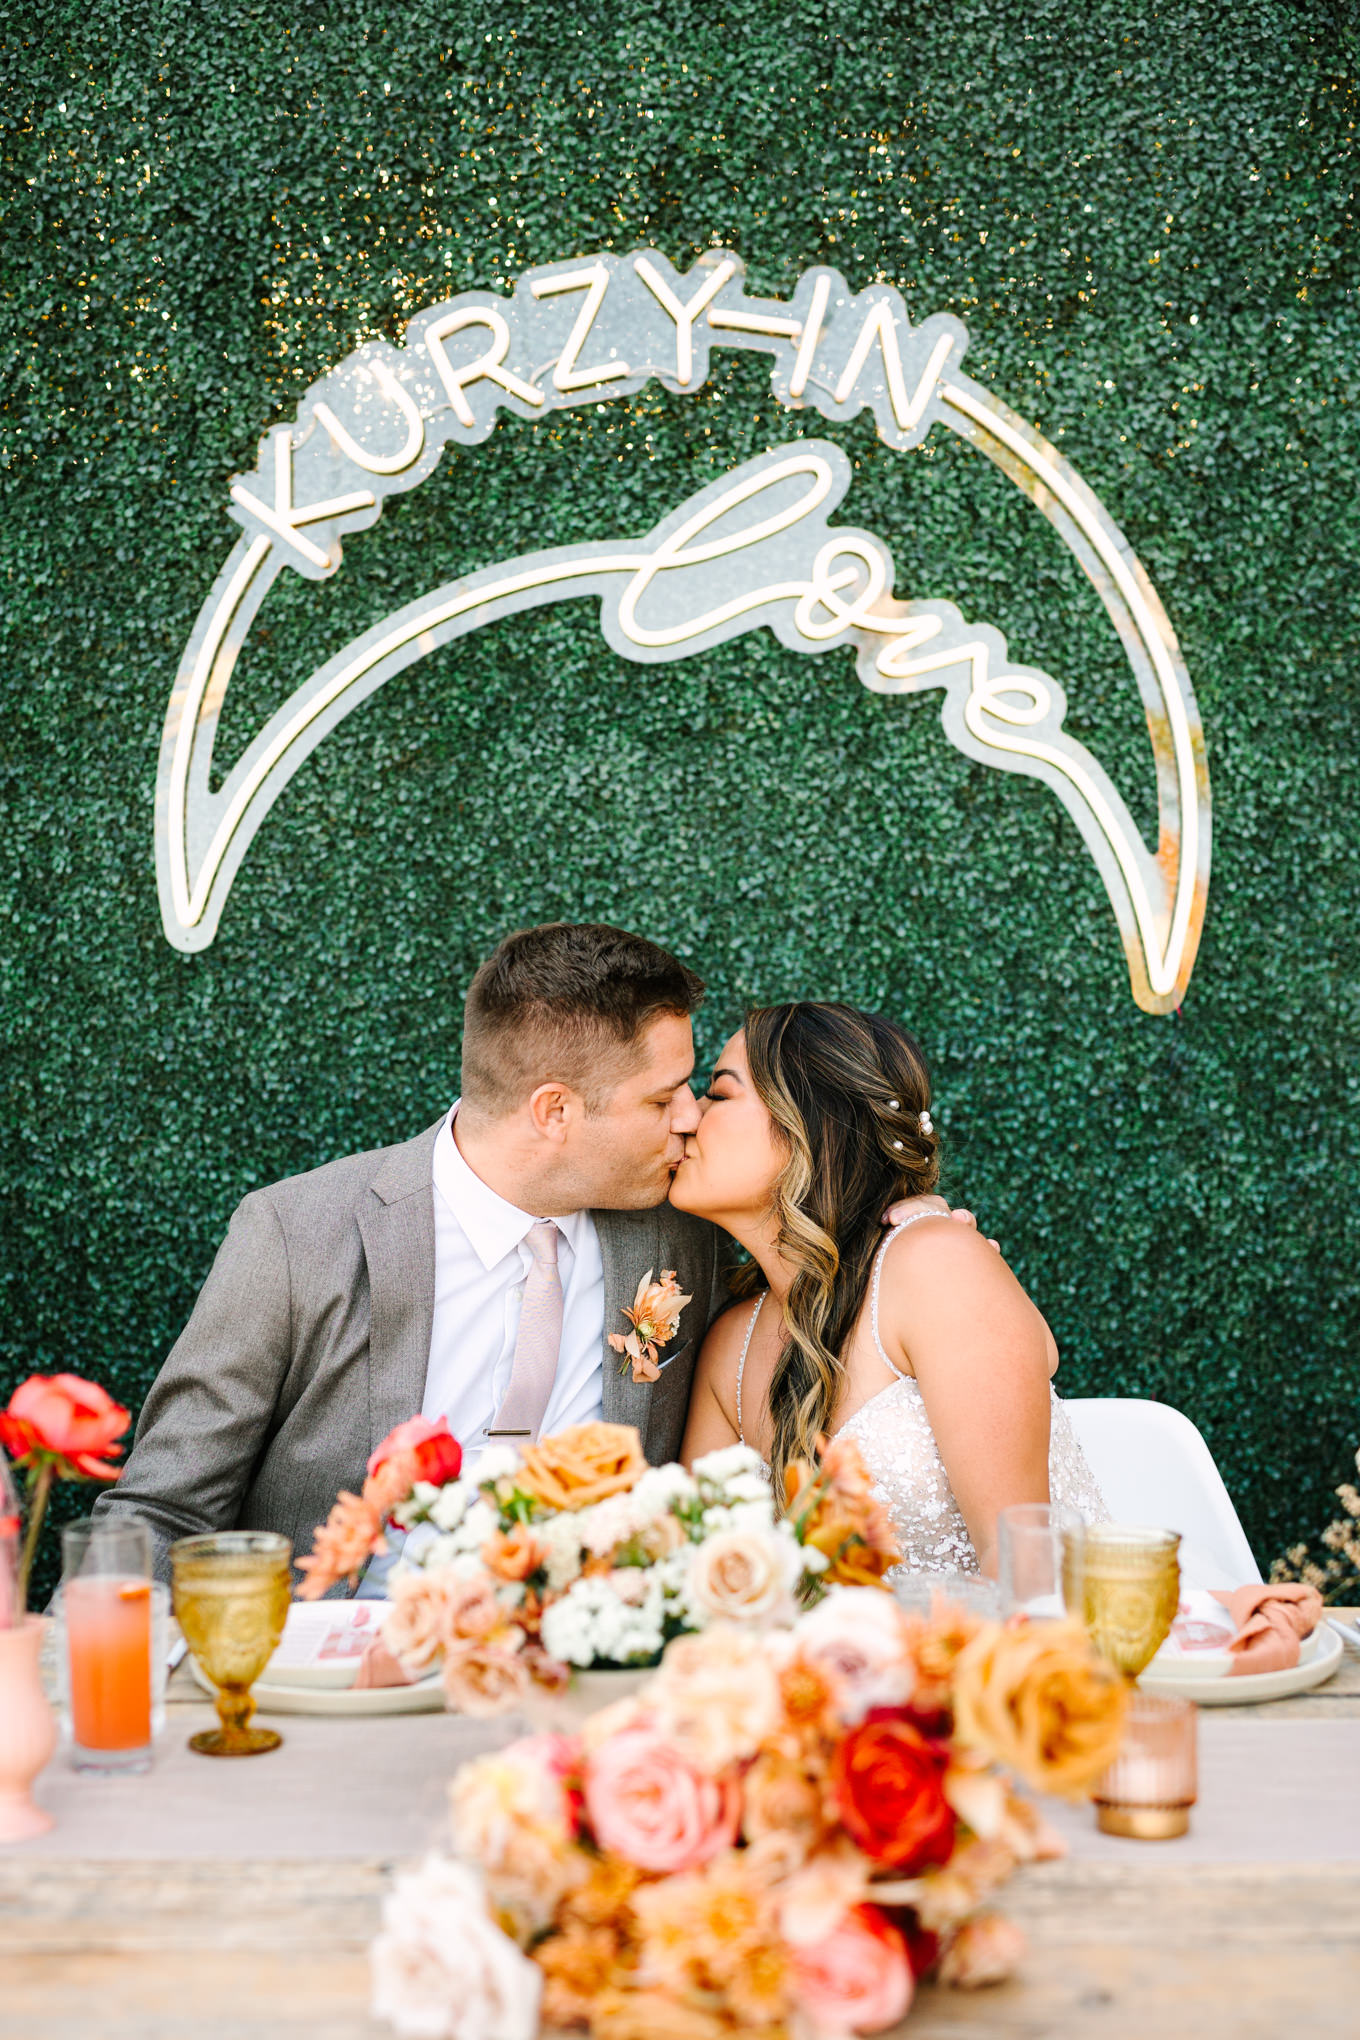 Bride and groom kissing with custom neon sign | Pink and orange Lautner Compound wedding | Colorful Palm Springs wedding photography | #palmspringsphotographer #palmspringswedding #lautnercompound #southerncaliforniawedding  Source: Mary Costa Photography | Los Angeles